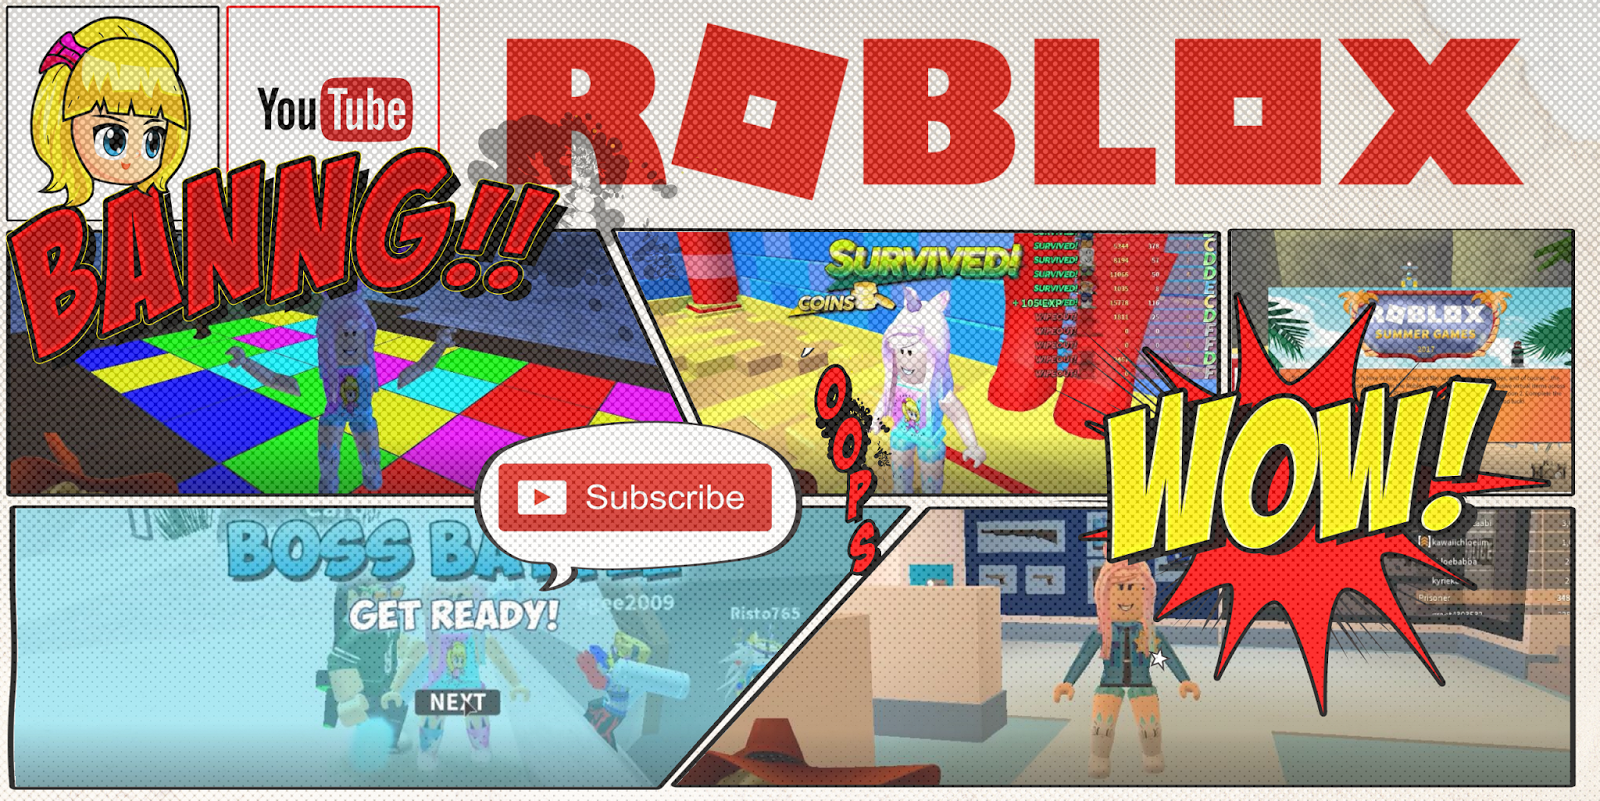 Roblox Gameplay 3 Eggs Getting The Chaotic Egg Of Catastrophes Eggs On Ice Tallaheggsee Zombie Slayer Easter Egg Hunt 2019 Steemit - roblox zombie rush how to get the tallaheggsee egg hunt